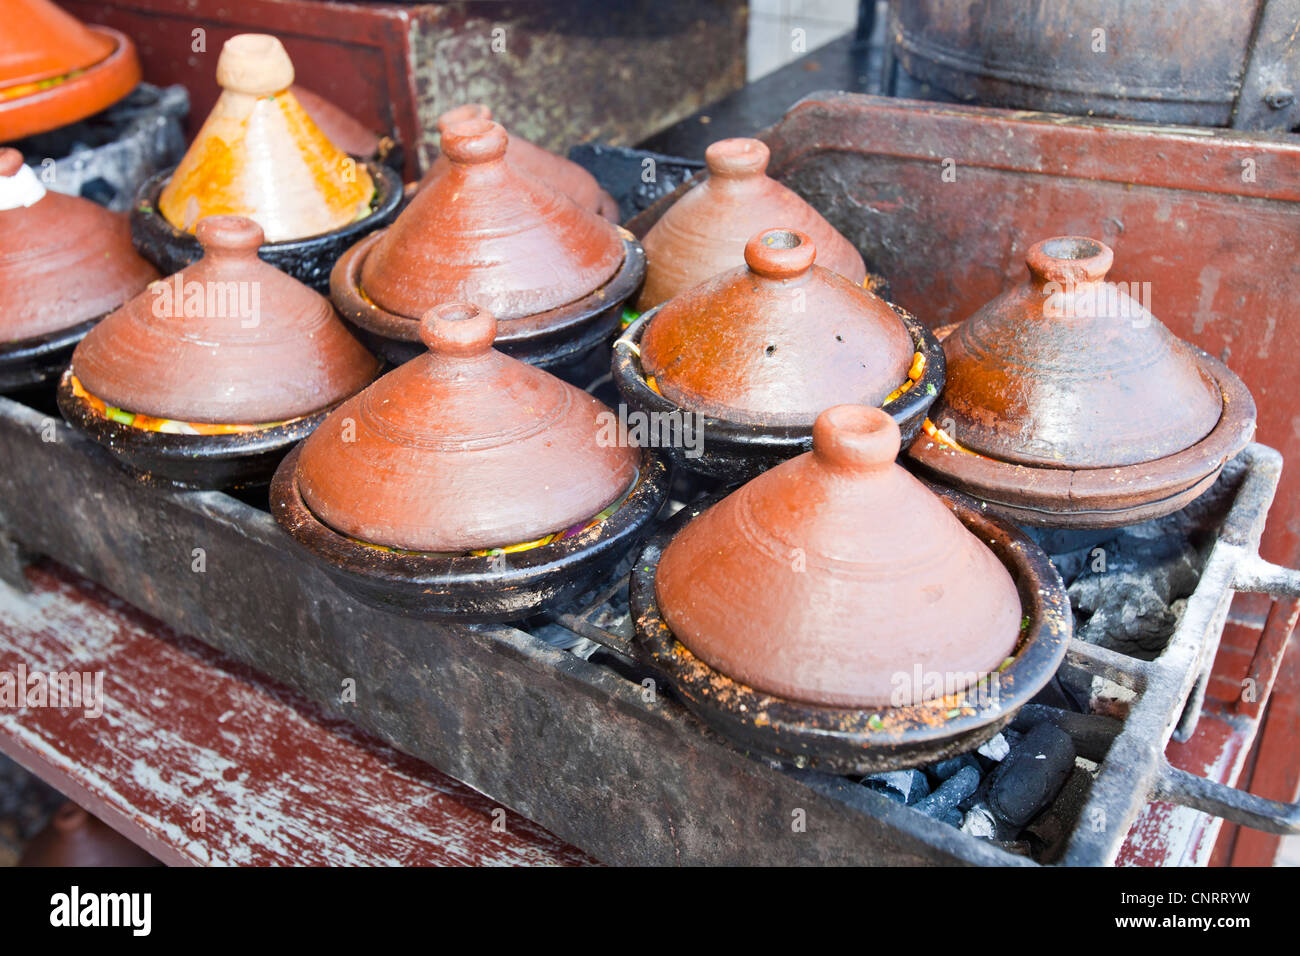 Tagines cooking on a cafe stove in Marrakech, Morocco, North Africa. Stock Photo